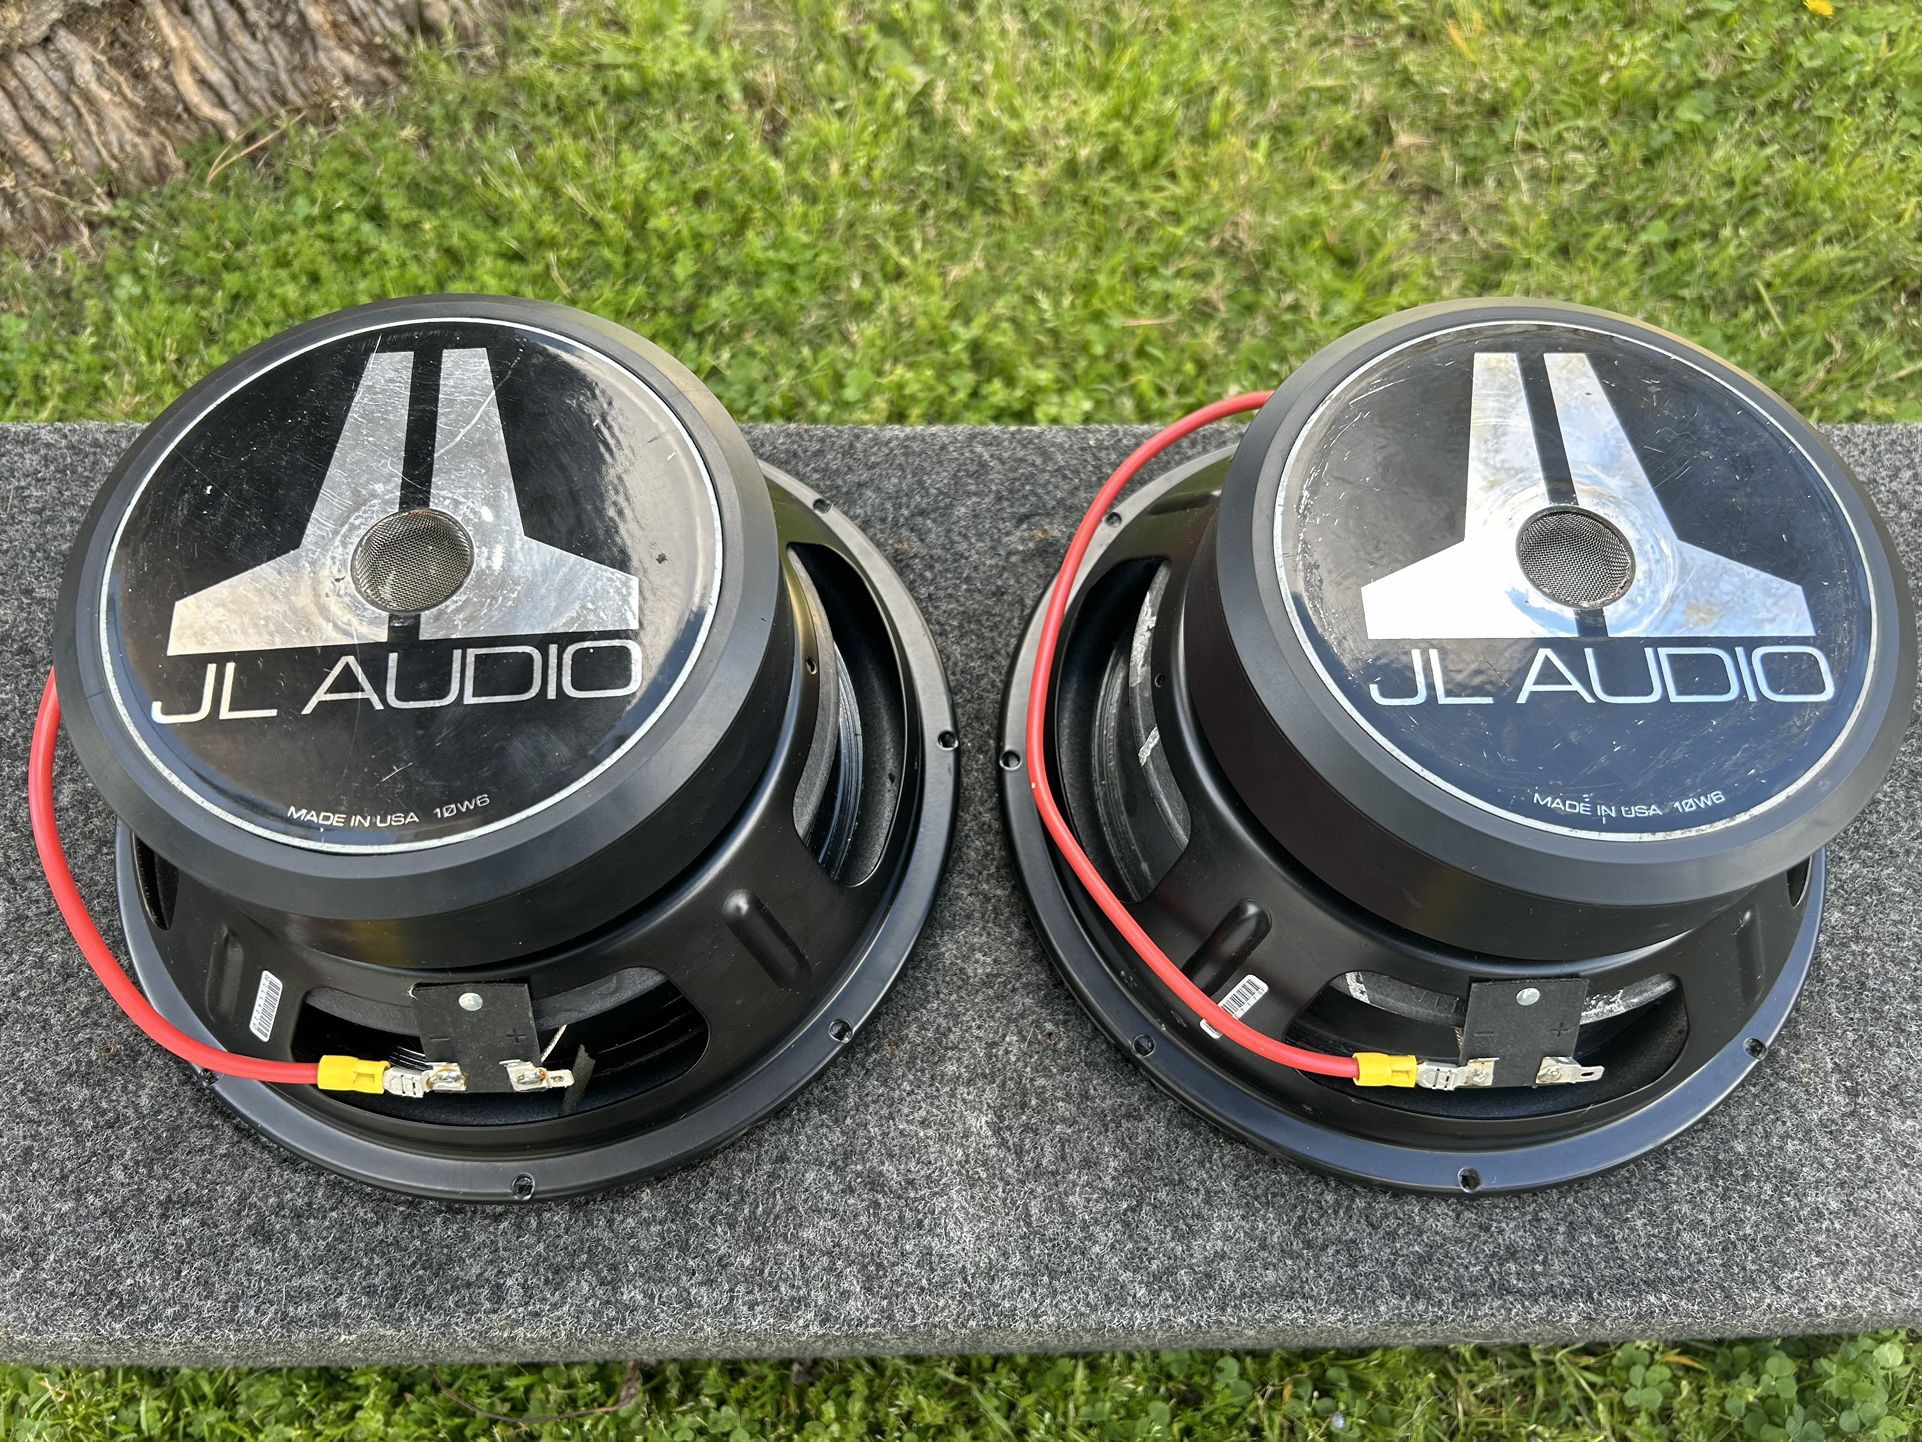 JL AUDIO 10w6 Subwoofers Version 1 Drivers Car Audio Speakers MADE IN USA